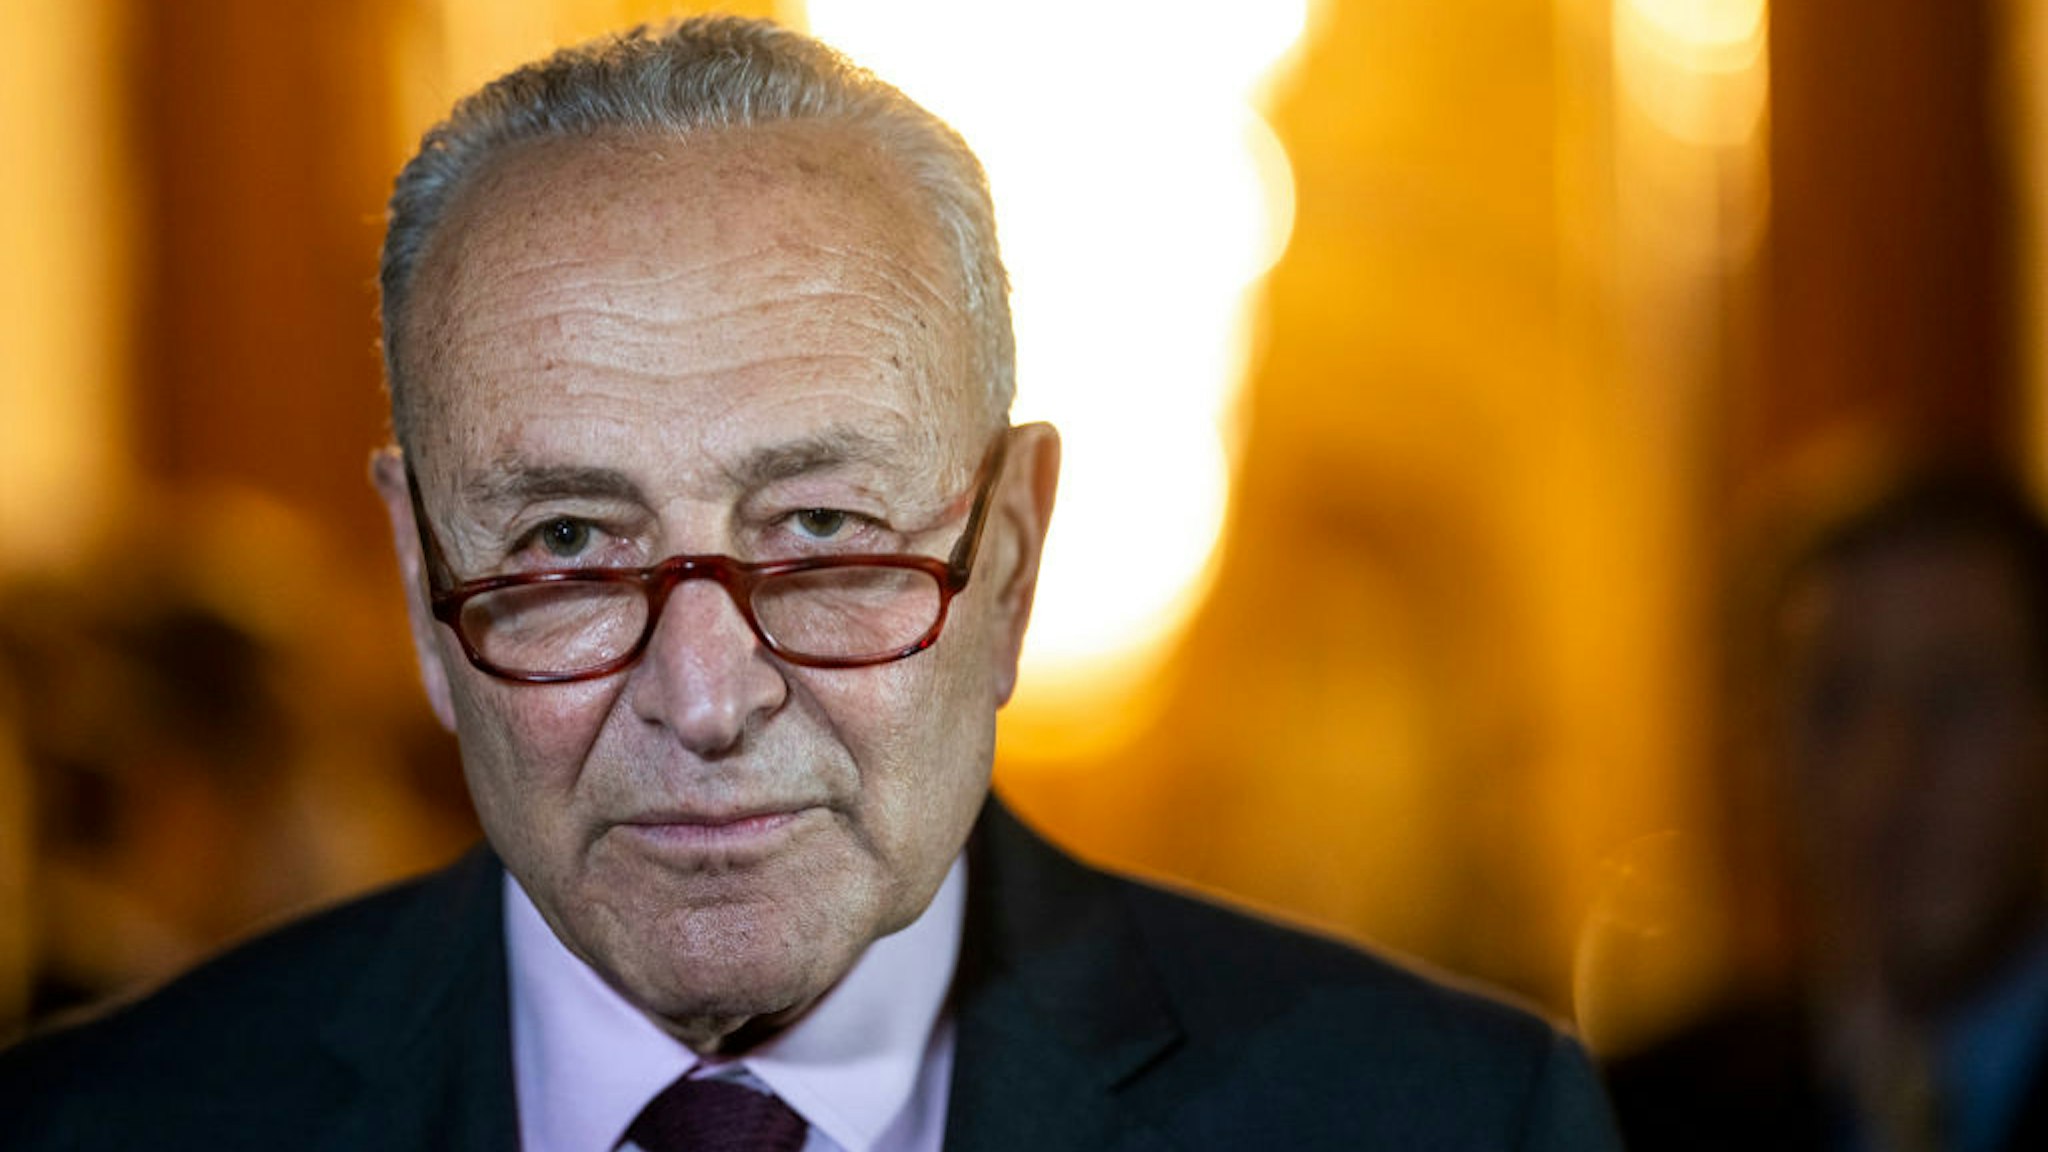 WASHINGTON, DC - MAY 11: Senate Majority Leader Chuck Schumer (D-NY) speak to the press following a vote on the Womens Health Protection Act, on Capitol Hill on Wednesday, May 11, 2022 in Washington, DC. (Kent Nishimura / Los Angeles Times via Getty Images)